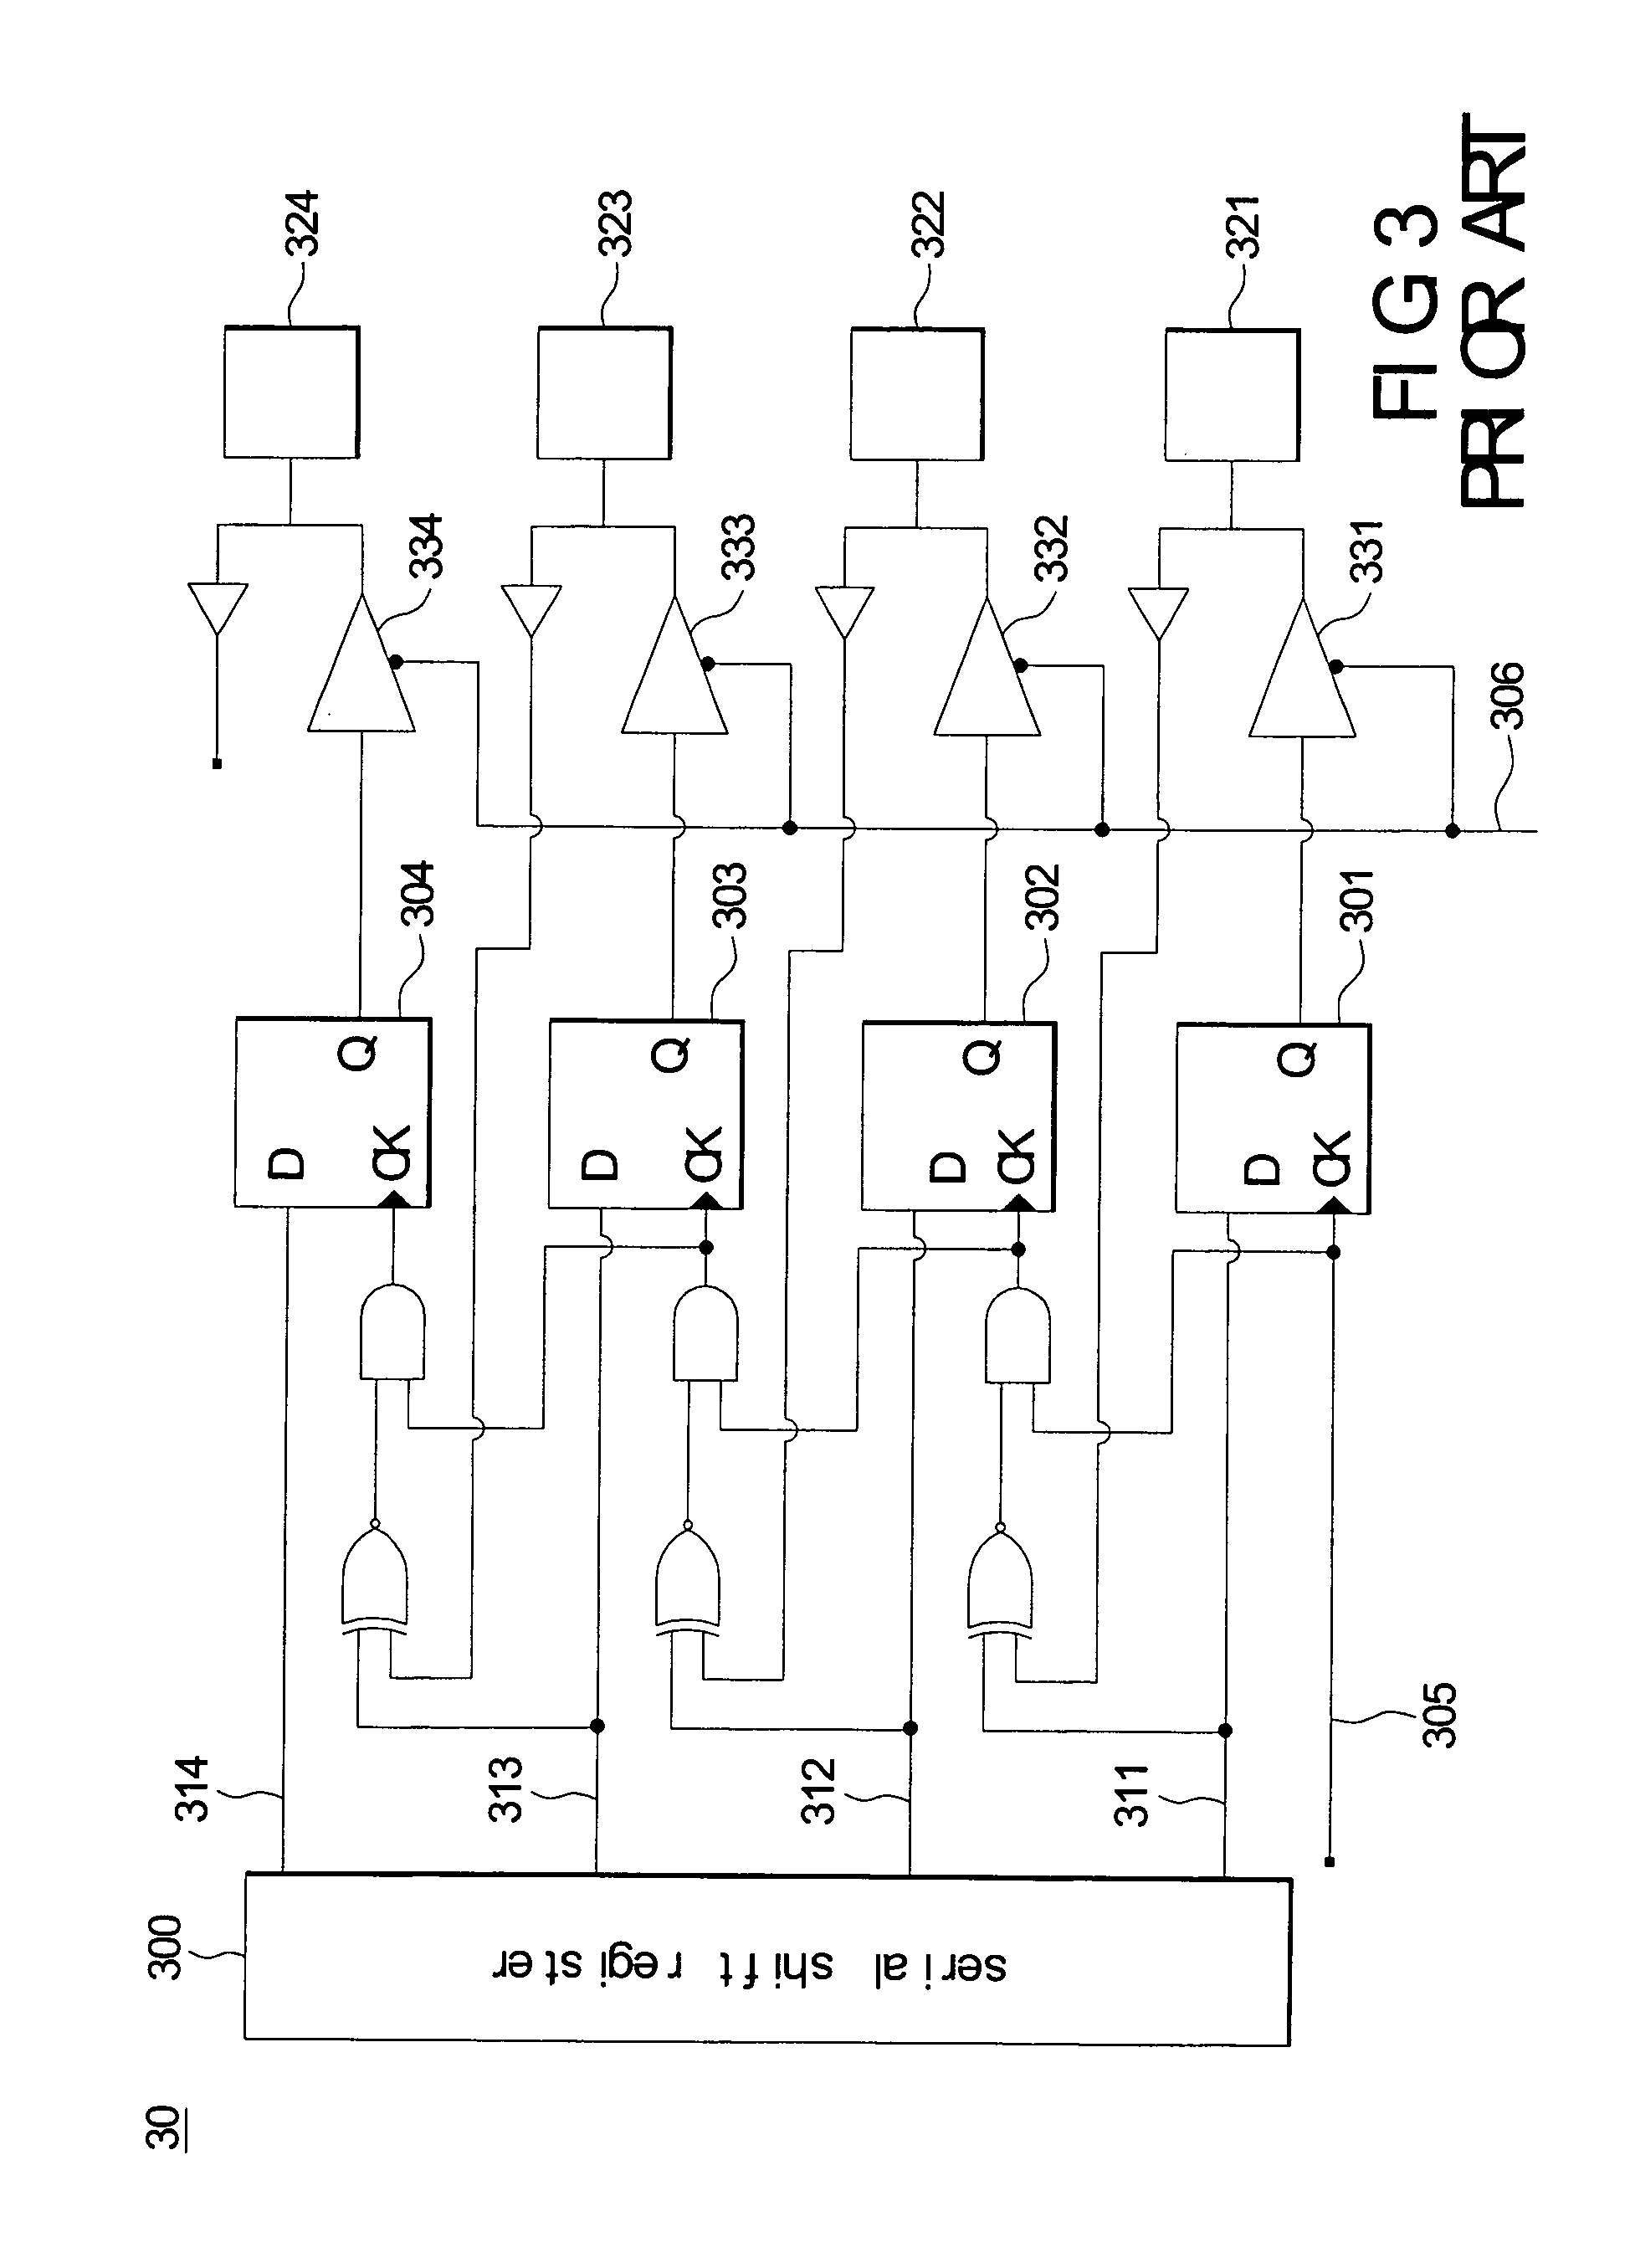 Dynamic slew rate controlling method and device for reducing variance in simultaneous switching output